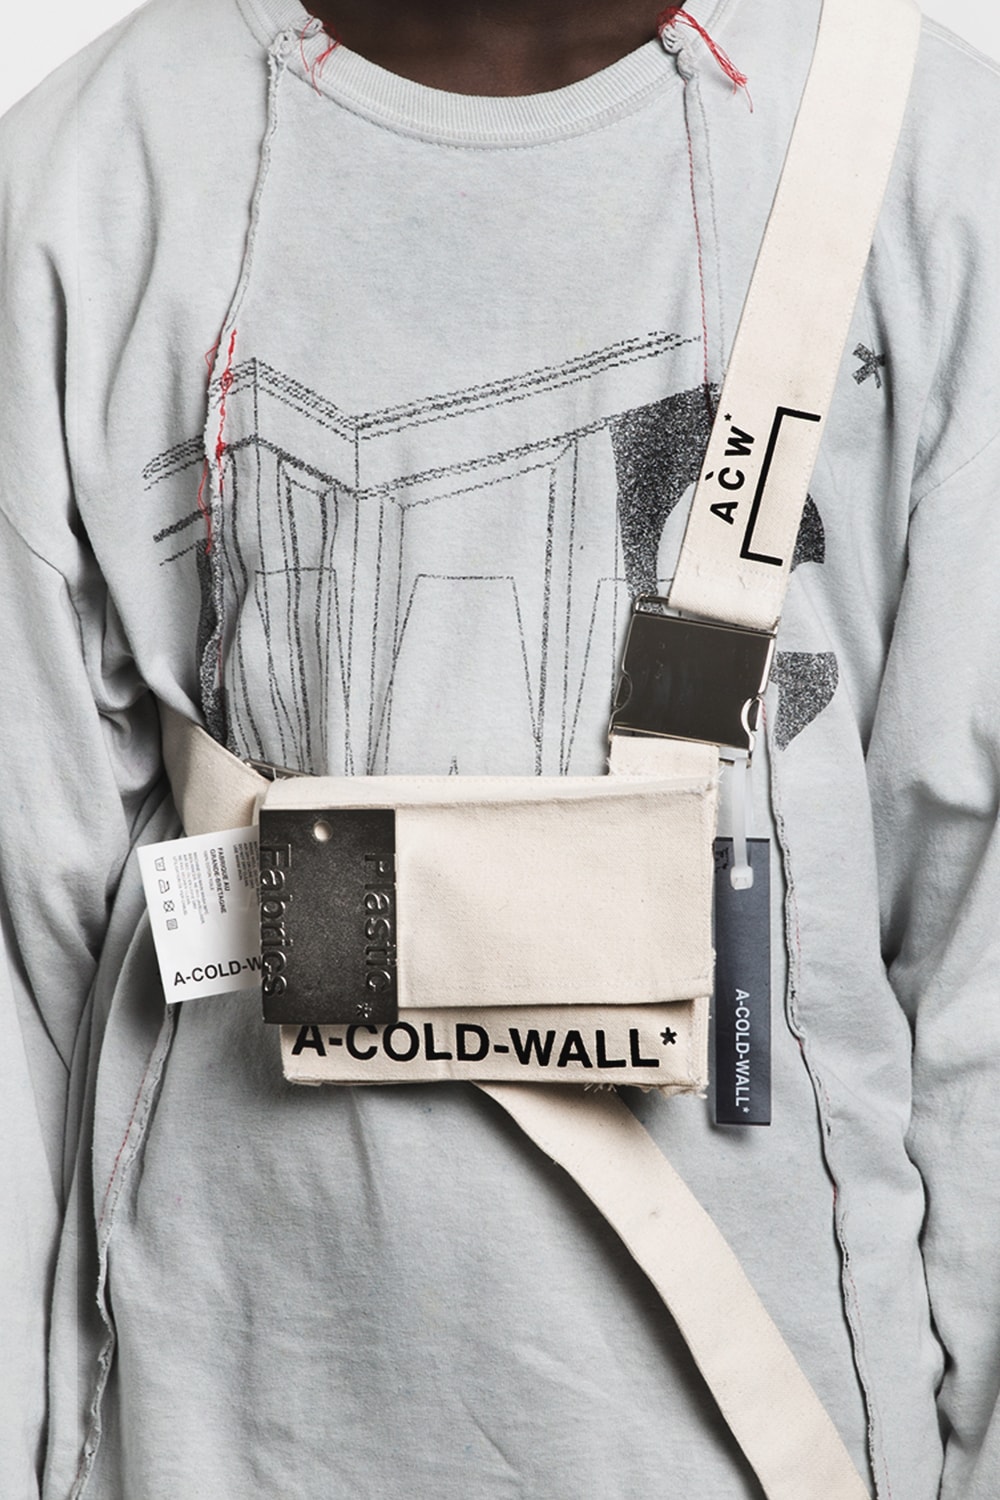 A-COLD-WALL* 2016 FW Accessories